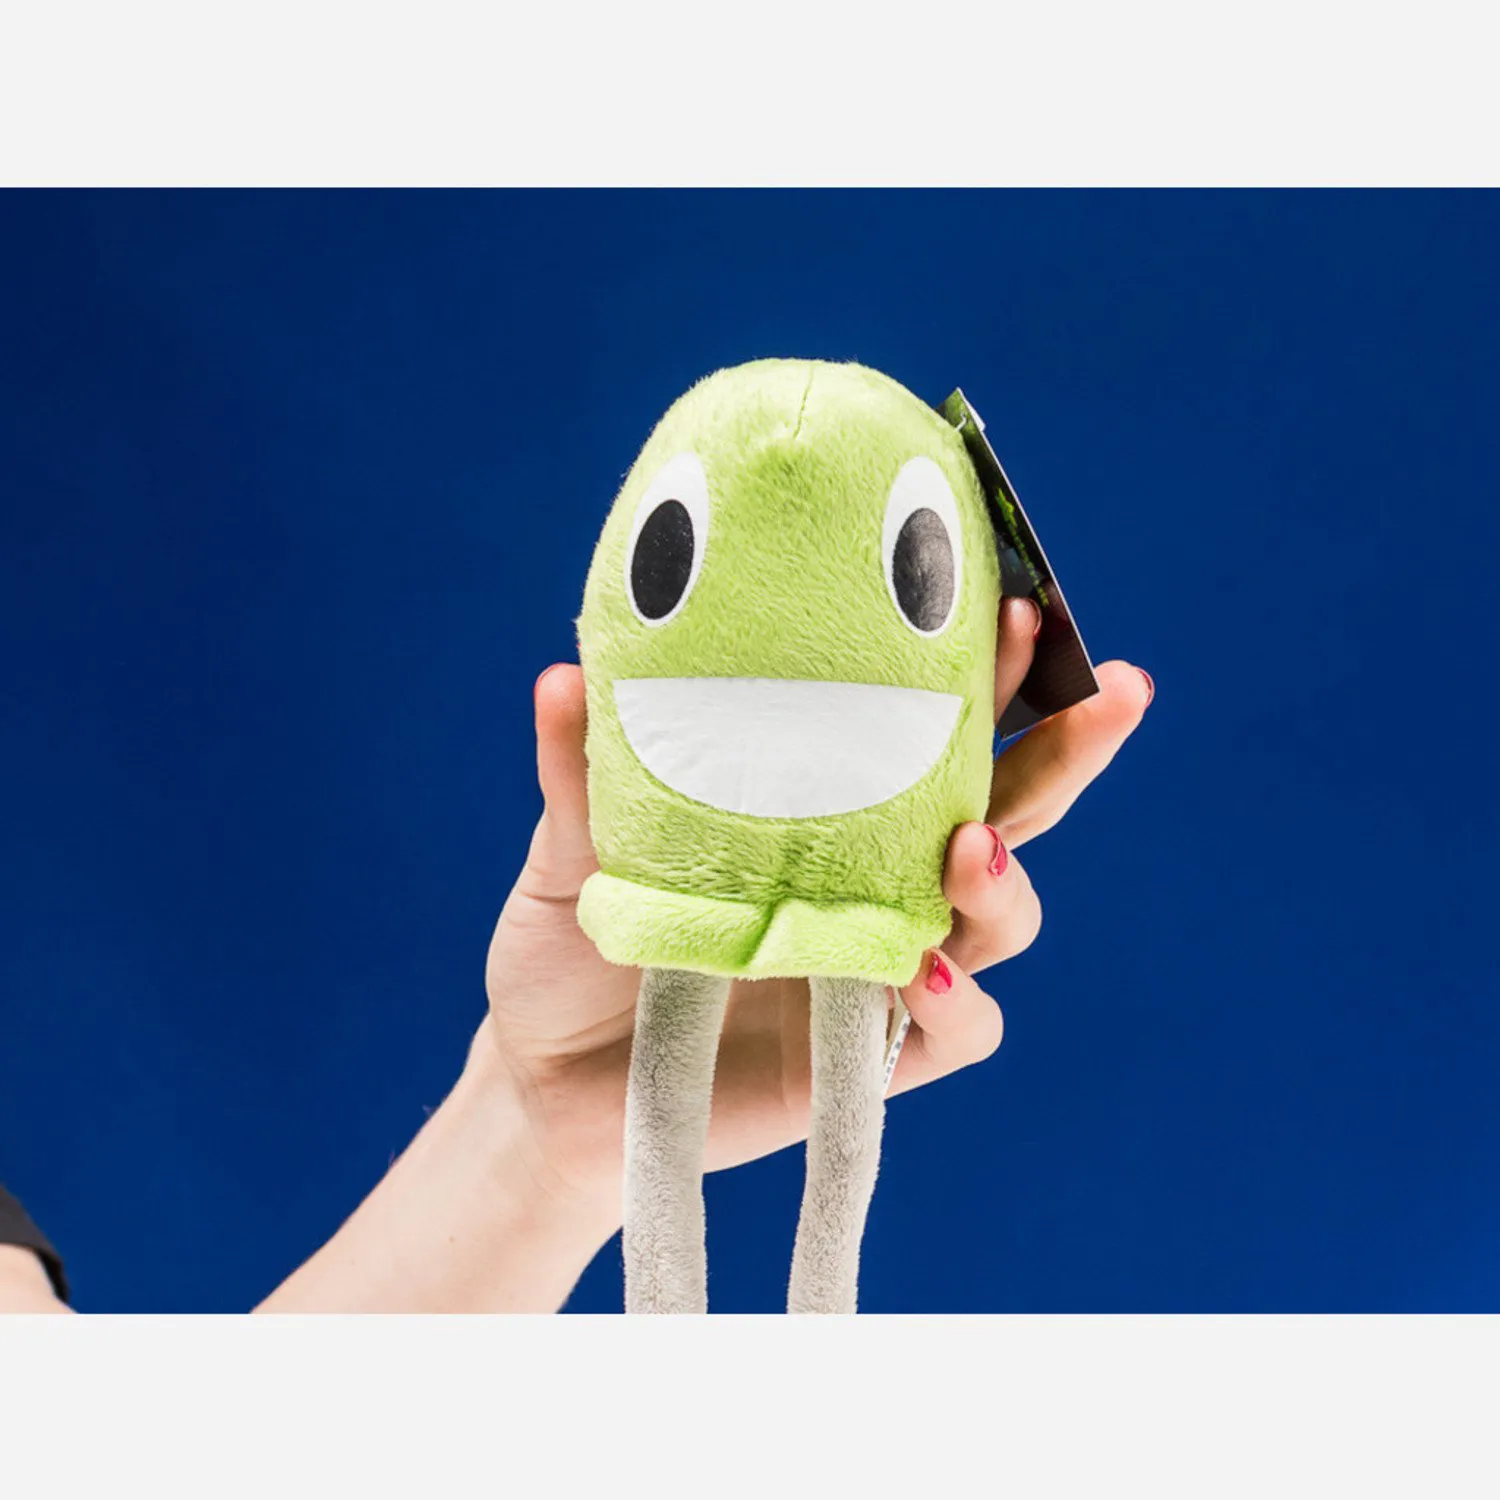 Photo of Gus the Green LED - Circuit Playground Plushie